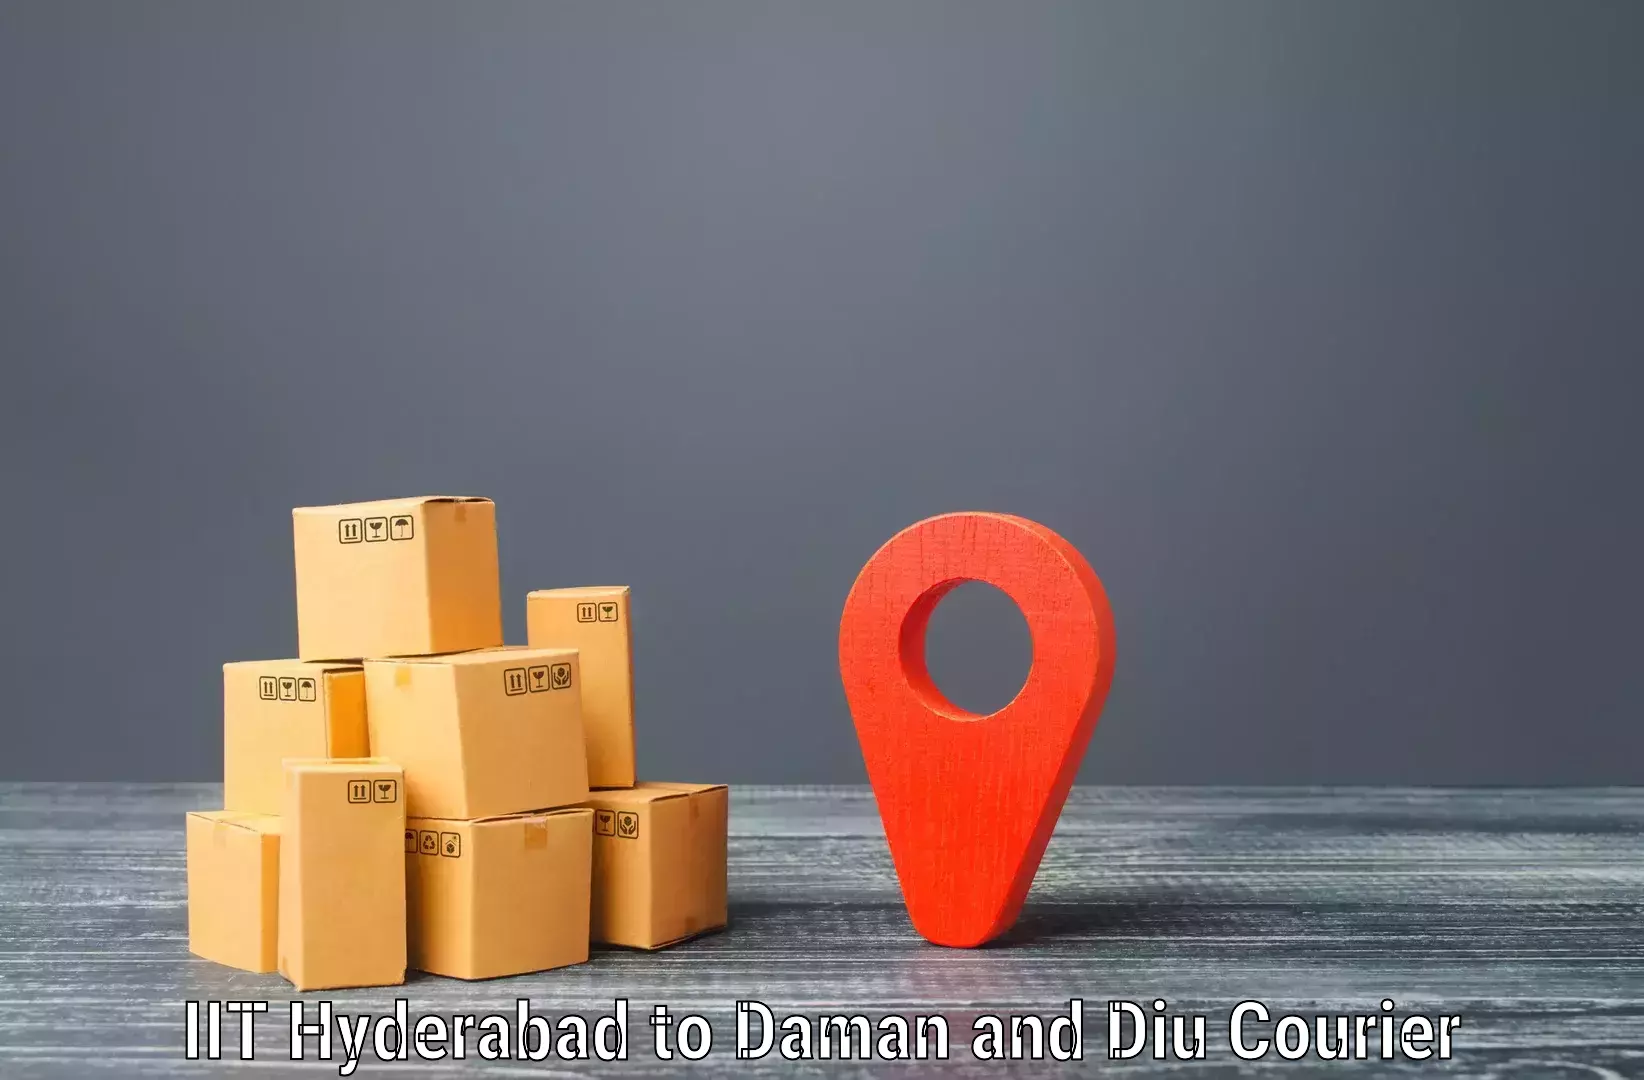 Tracking updates in IIT Hyderabad to Daman and Diu